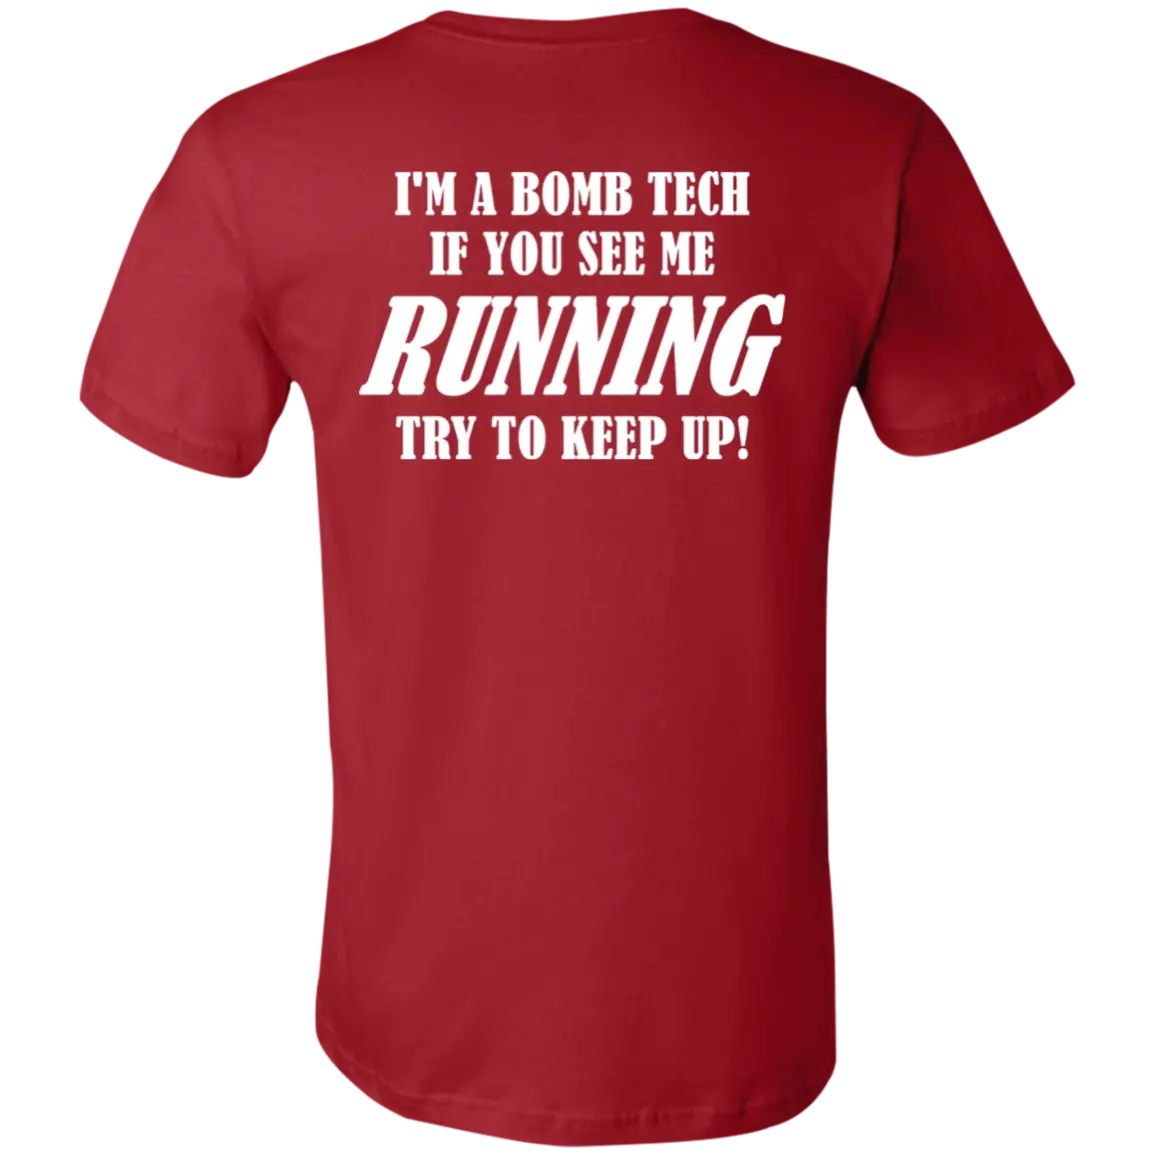 I'm A Bomb Tech... Short-Sleeve T-Shirt - T-Shirts Canvas Red / S Real Domain Streetwear Real Domain Streetwear